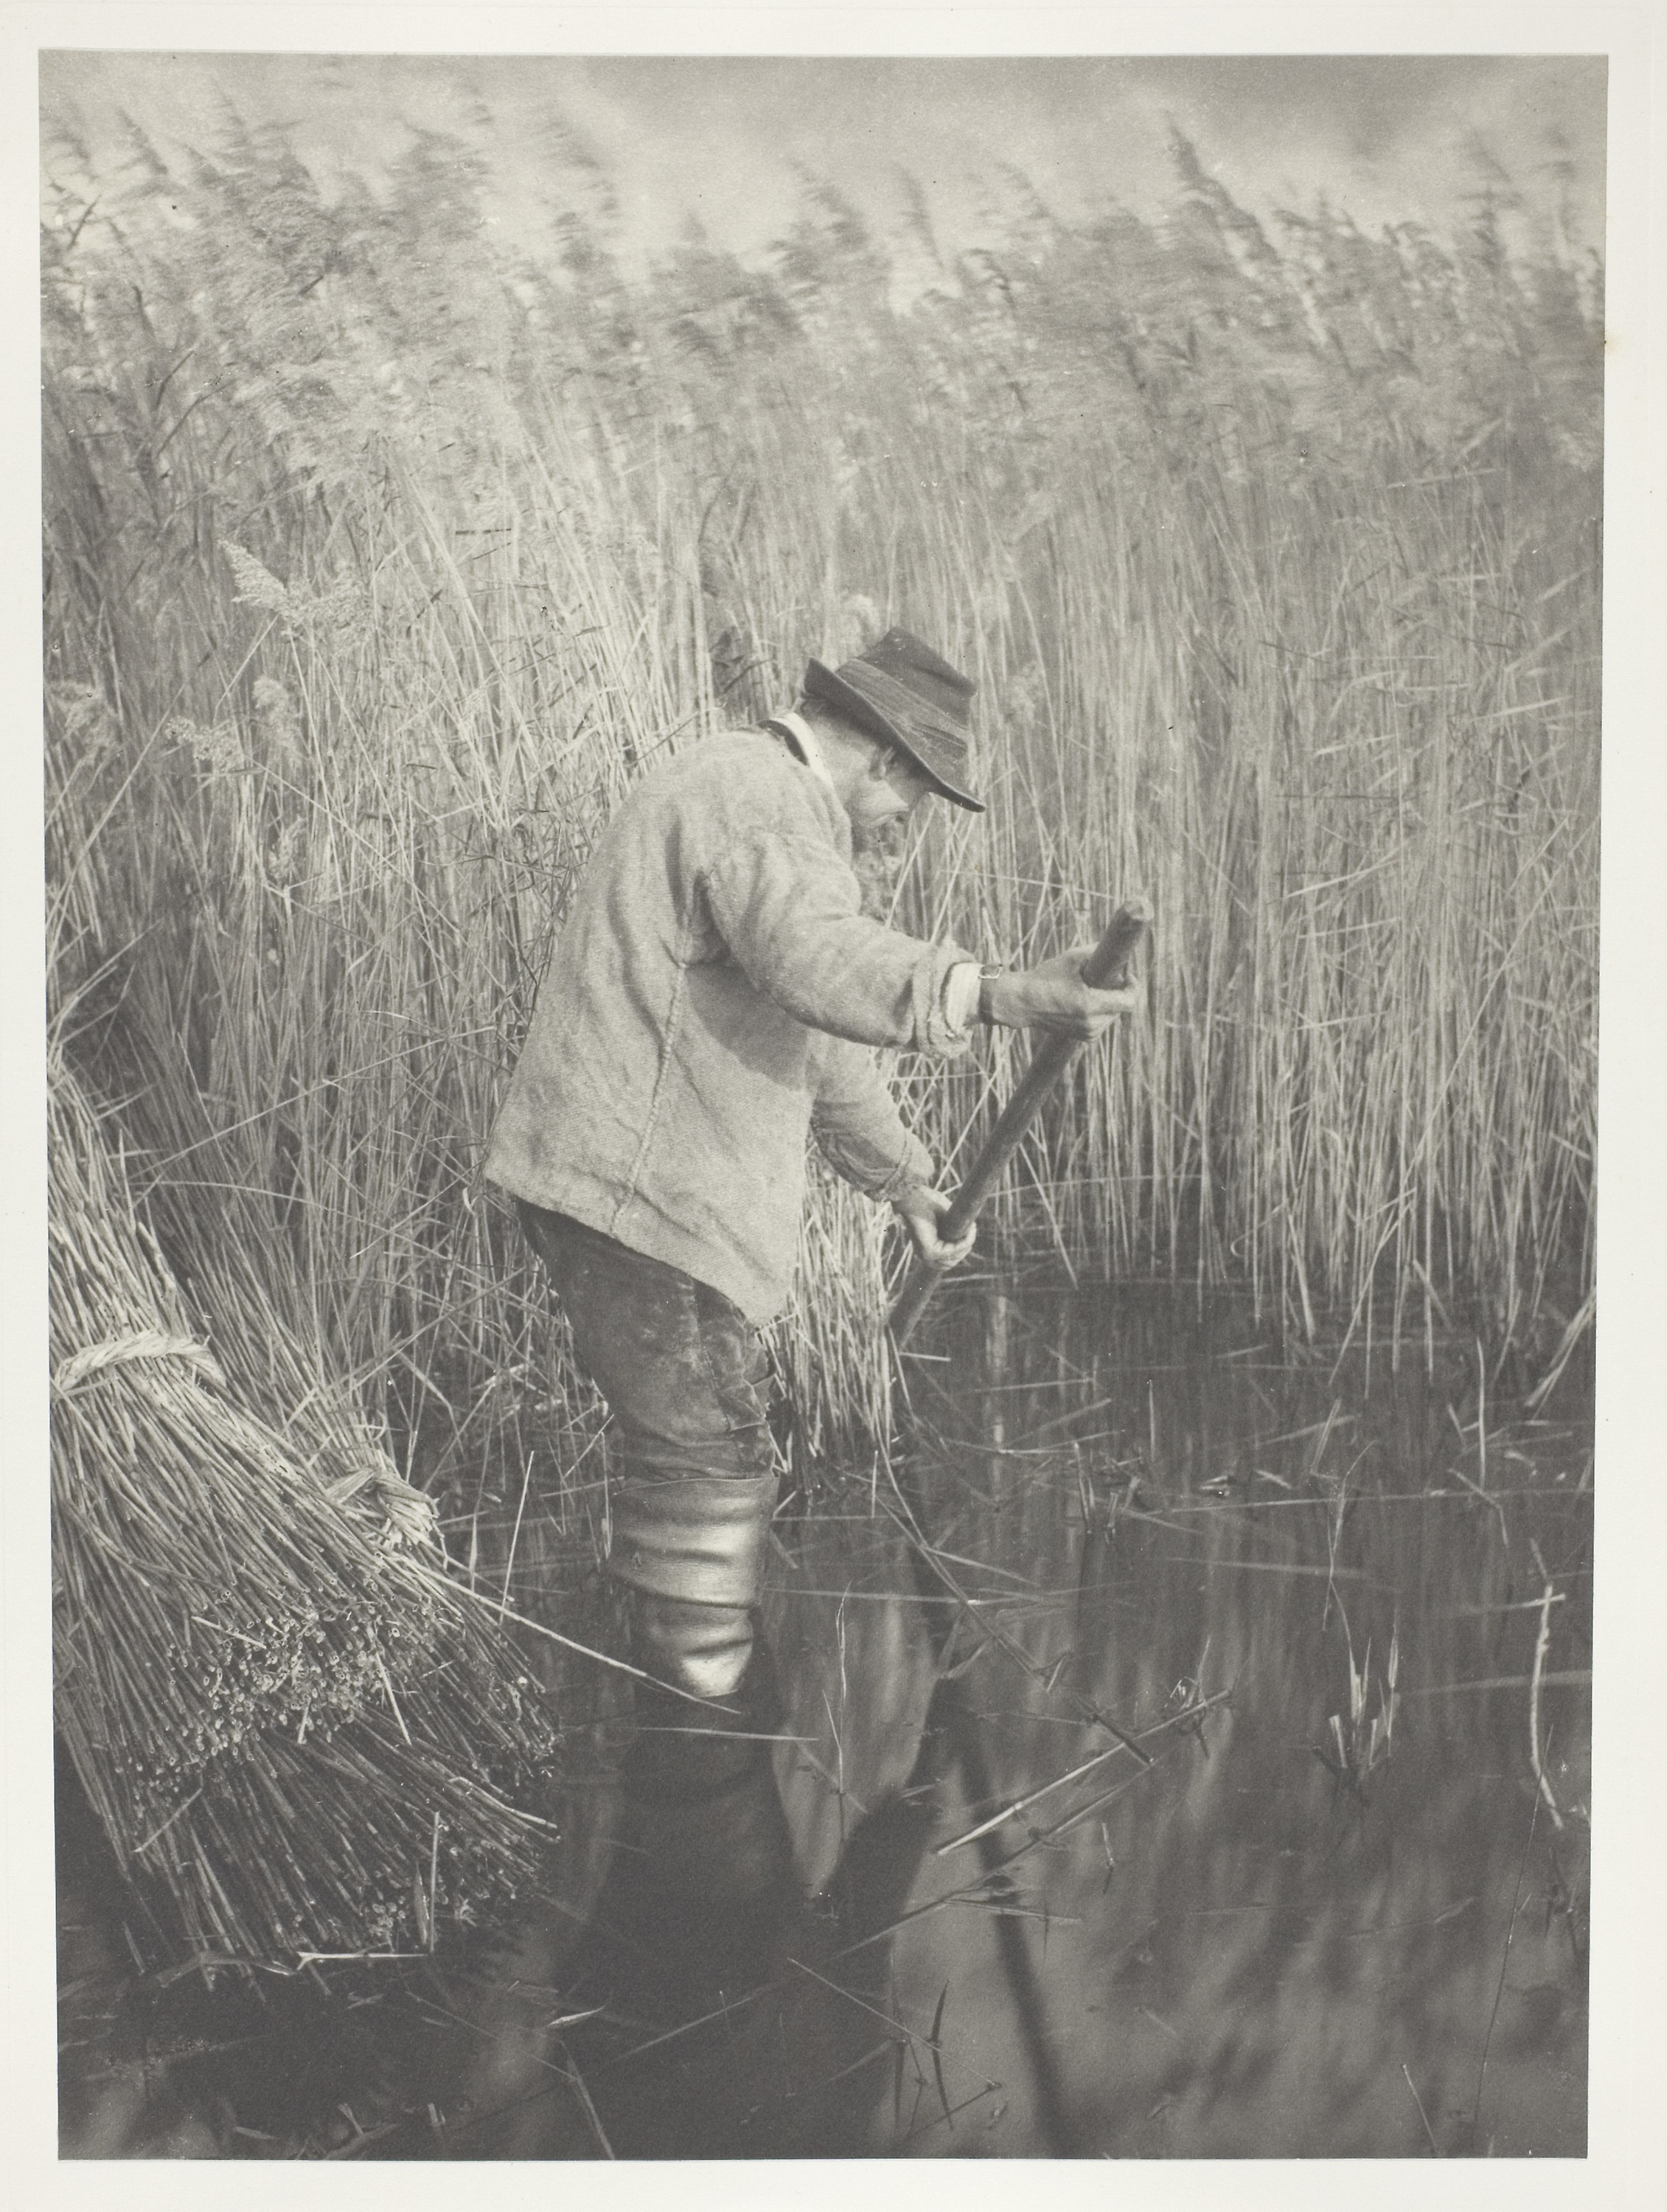 EMERSON (1886) - A Reed-Cutter at Work